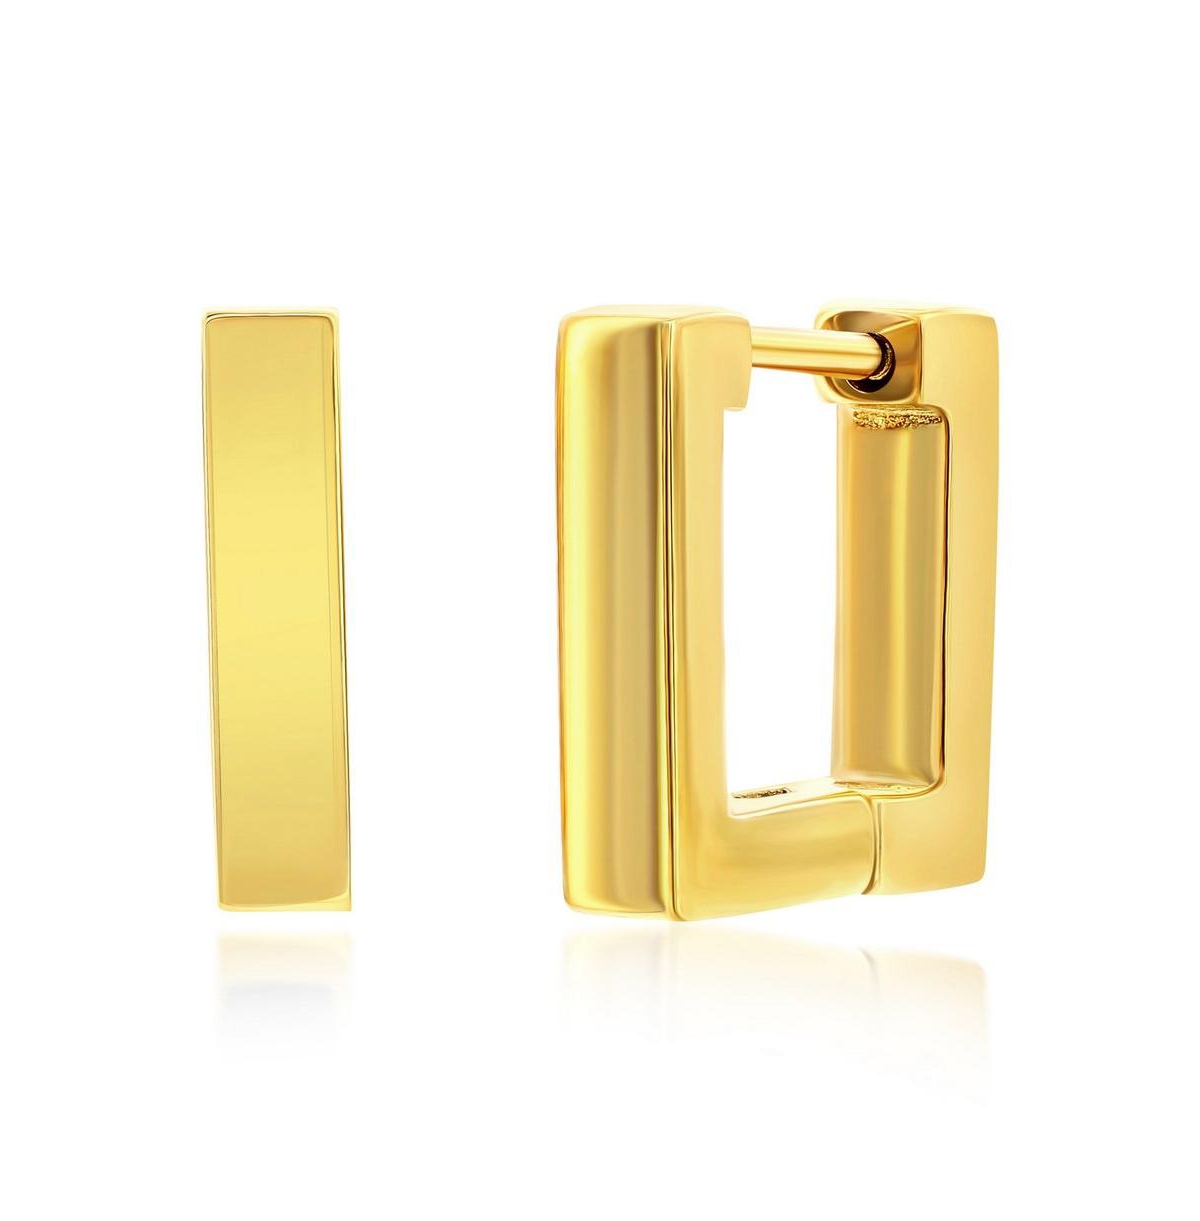 Stainless Steel, Gold Plated or Black Pated Over Stainless Steel 12mm Square Huggie Earrings - Black